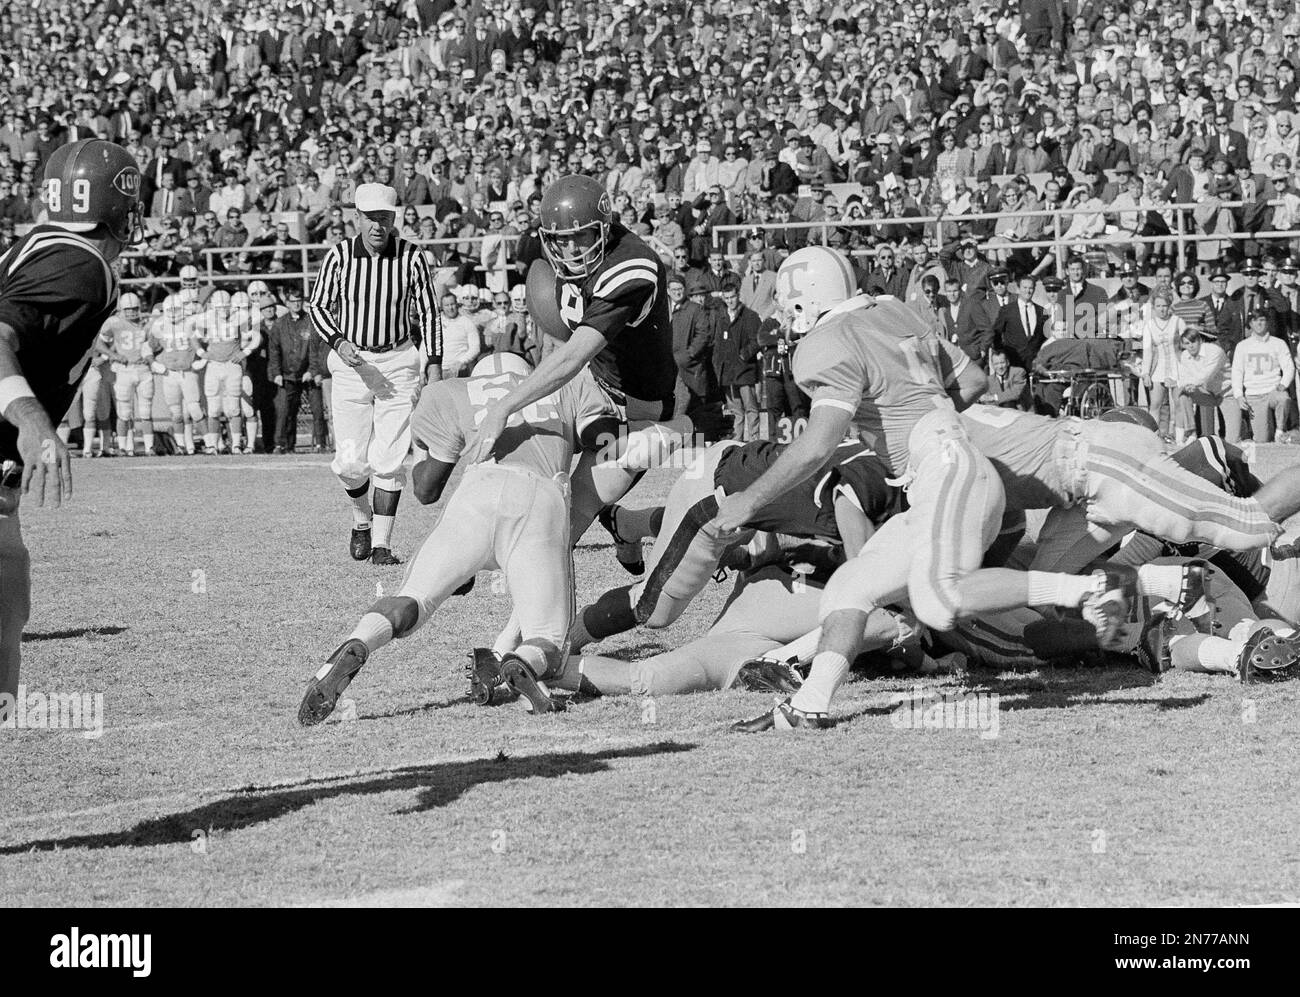 Ole Miss quarterback Archie Manning (18) fumbles the ball on the goal line as he is hit by Tennessee's Jackie Walker (52) in the game at Jackson, Miss., Nov. 15, 1966. Ole Miss tailback Randy Reed, blocking at right, fell on the ball in the end zone to score. Ole Miss took an early lead over third-ranked Tennessee and had an upset in the making. (AP Photo/LG) Stock Photo